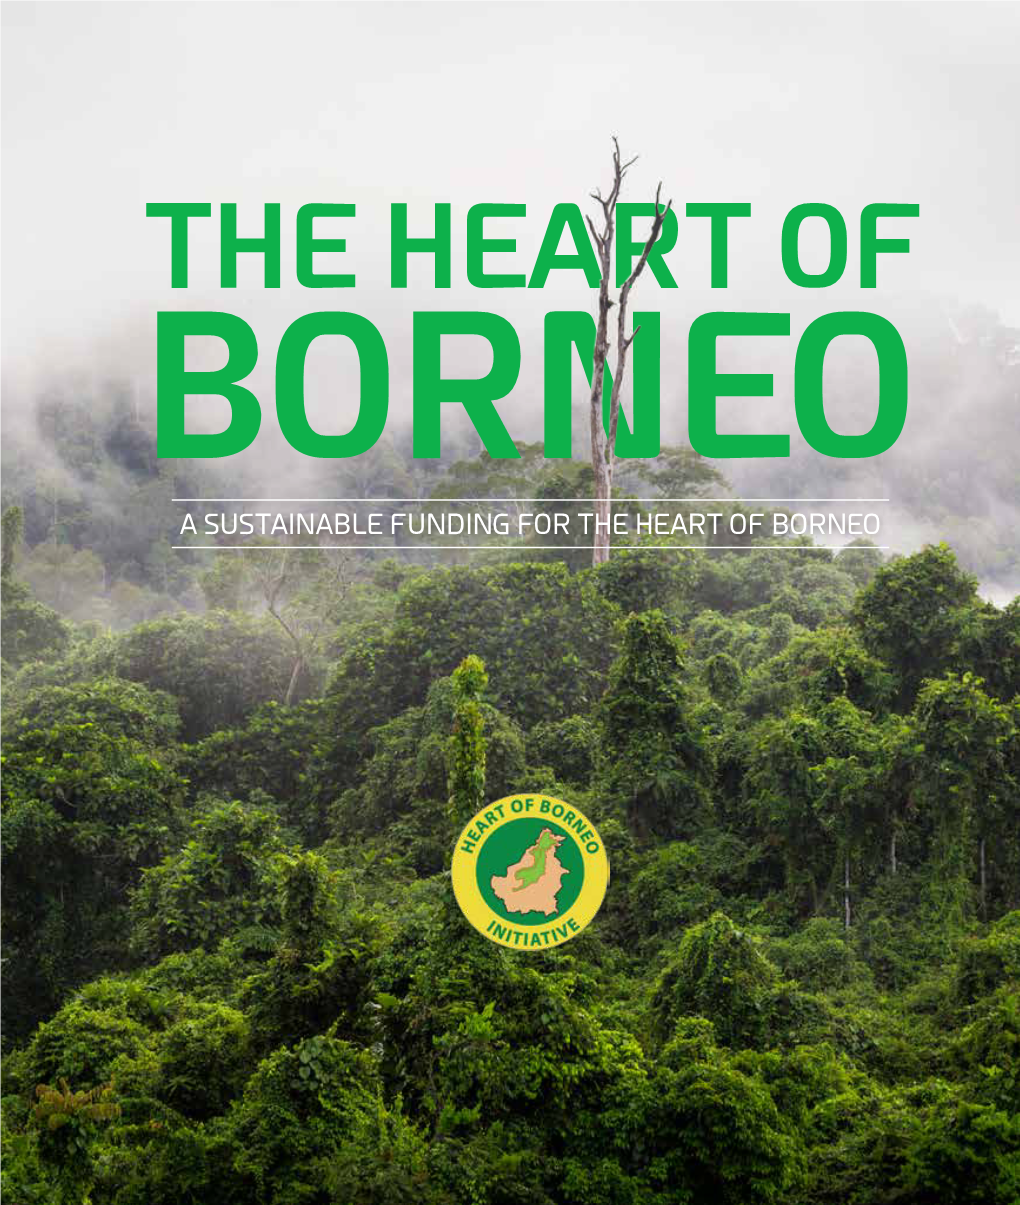 A Sustainable Funding for the Heart of Borneo